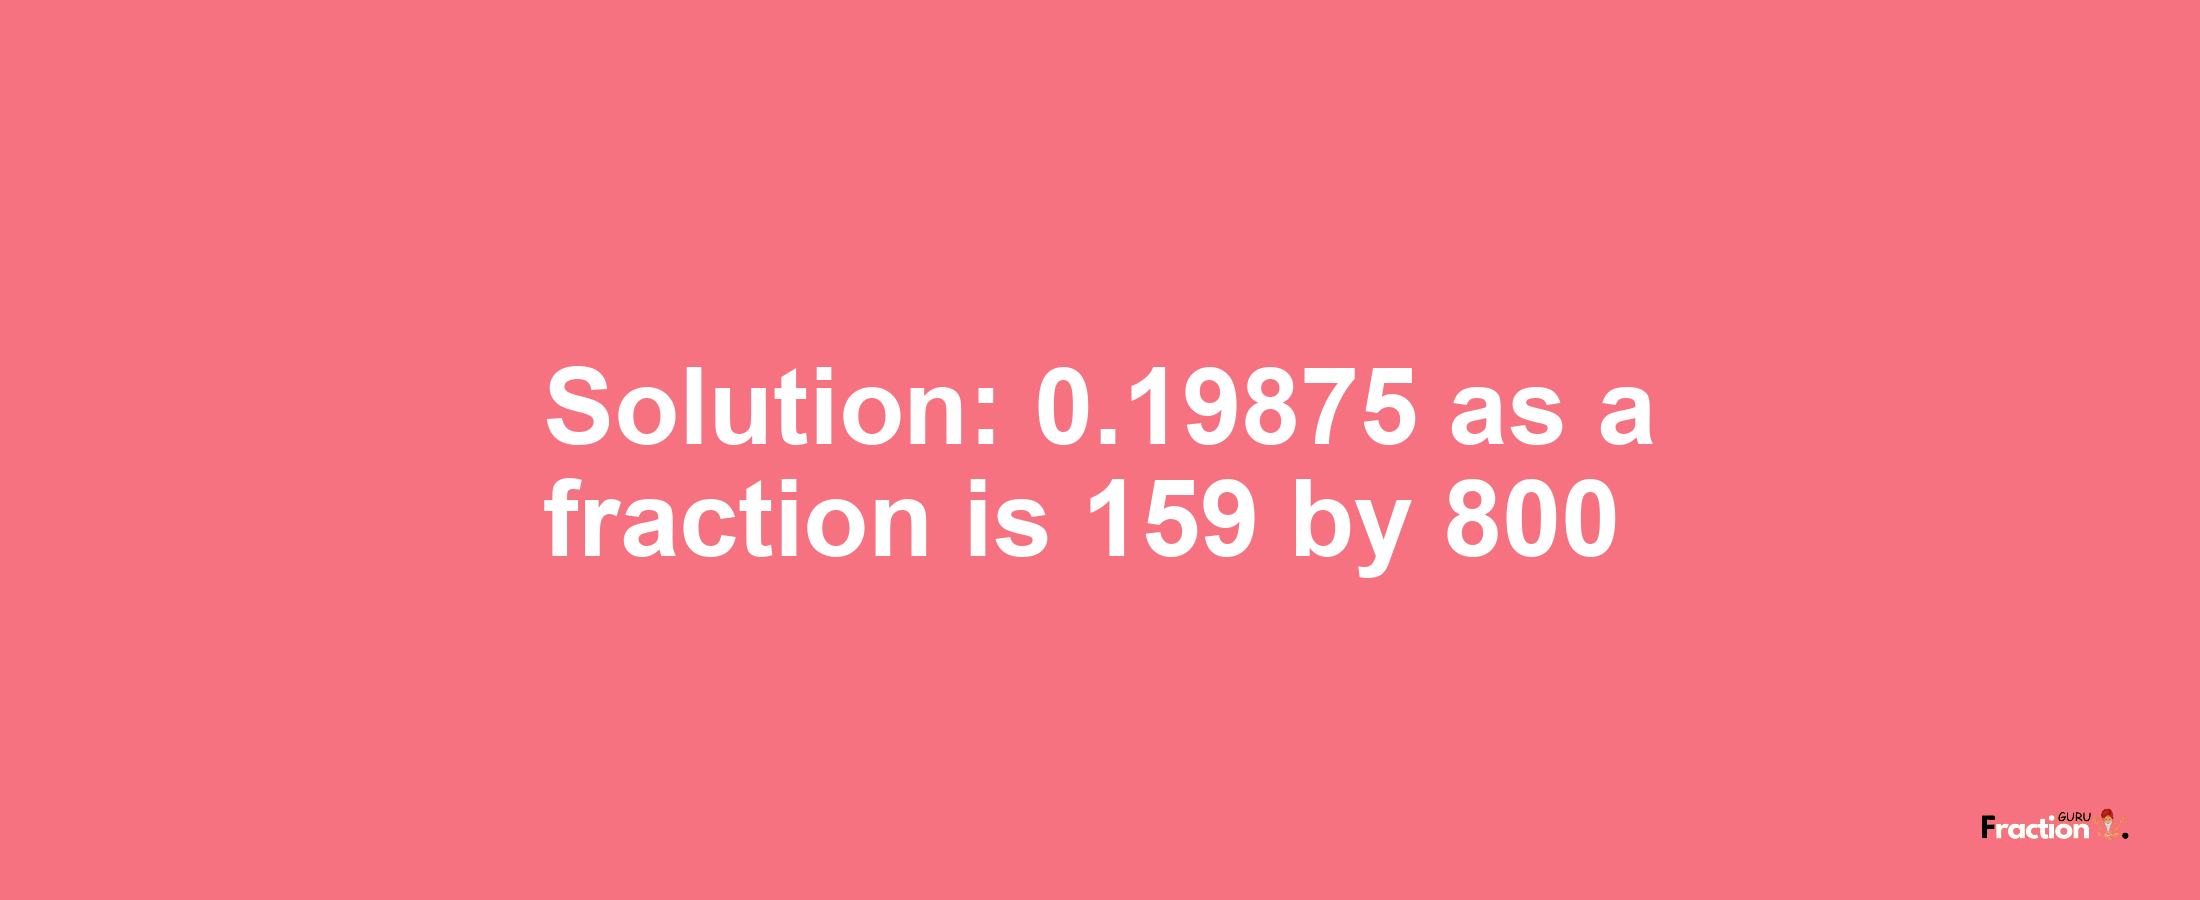 Solution:0.19875 as a fraction is 159/800